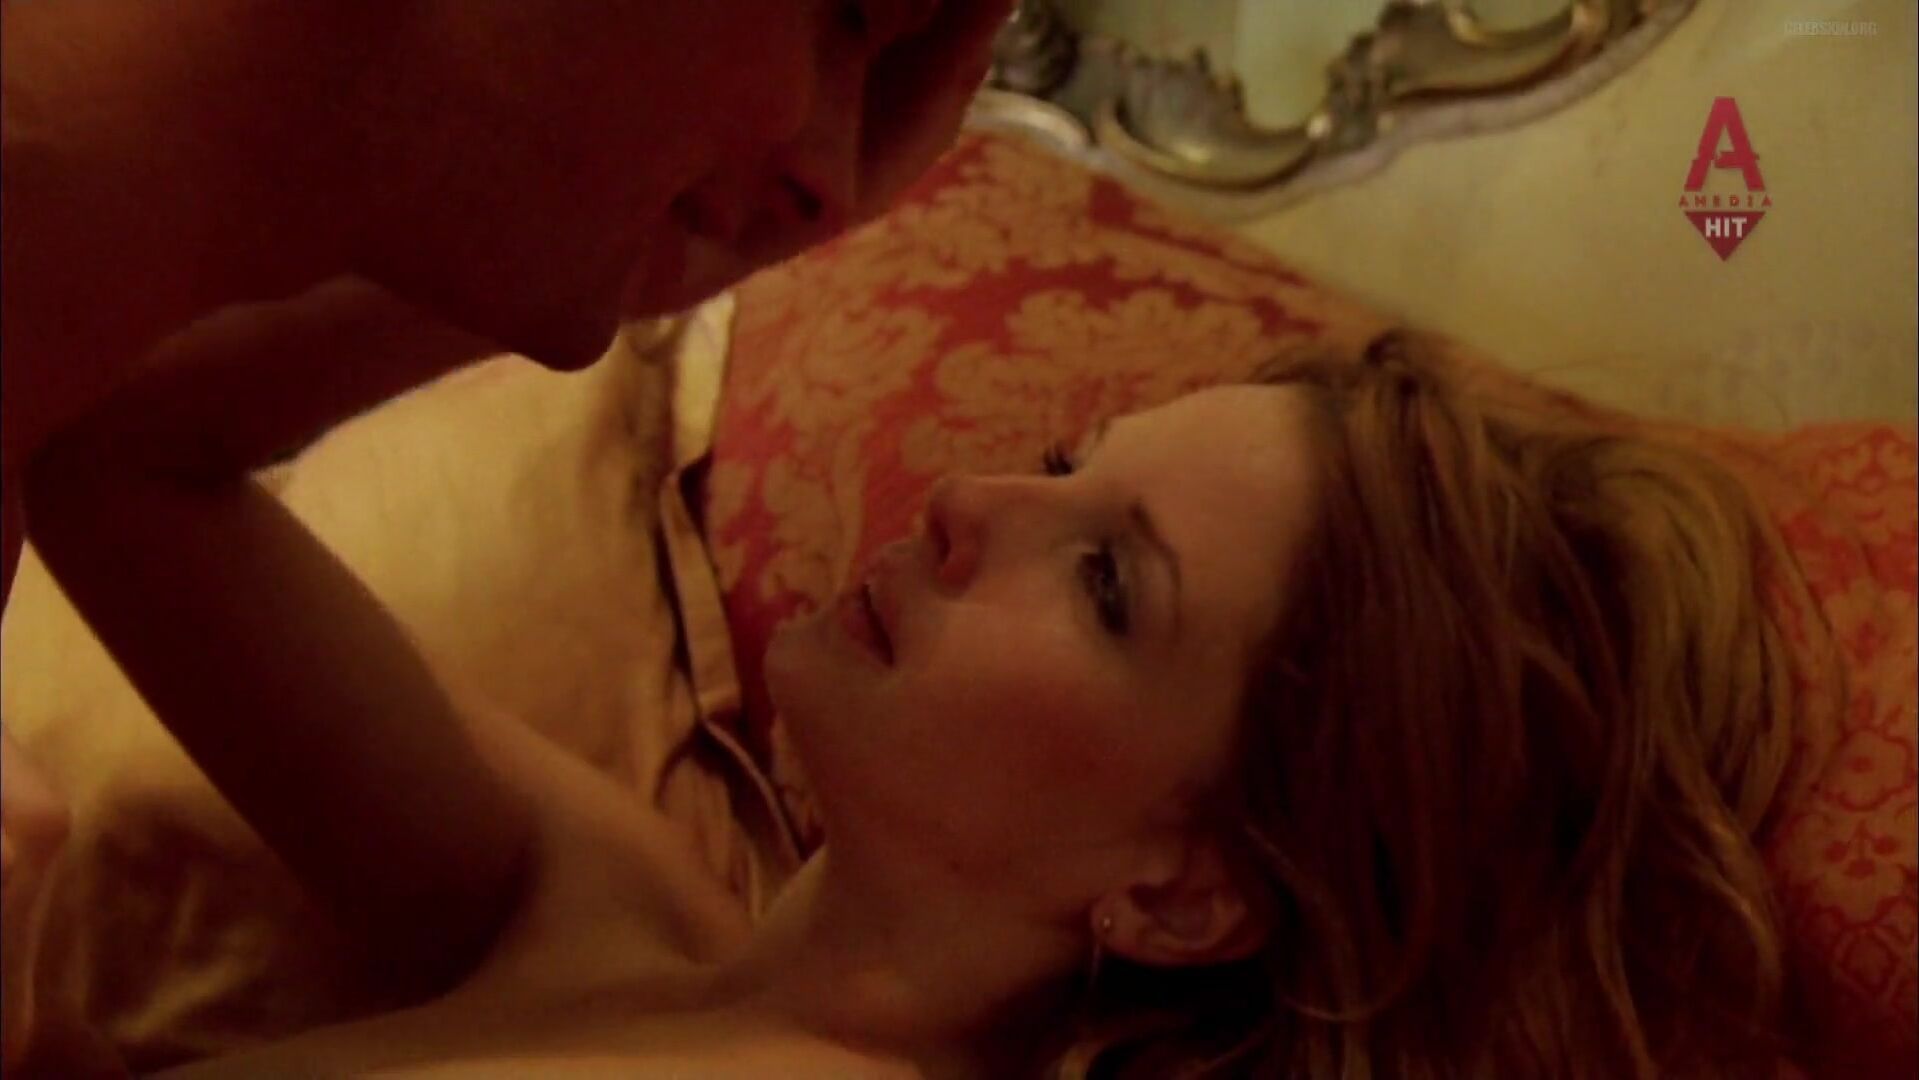 Fake Redhead Kelly Reilly visits lover every day to be penetrated in Joe's Palace (2007) Anal Creampie - 1